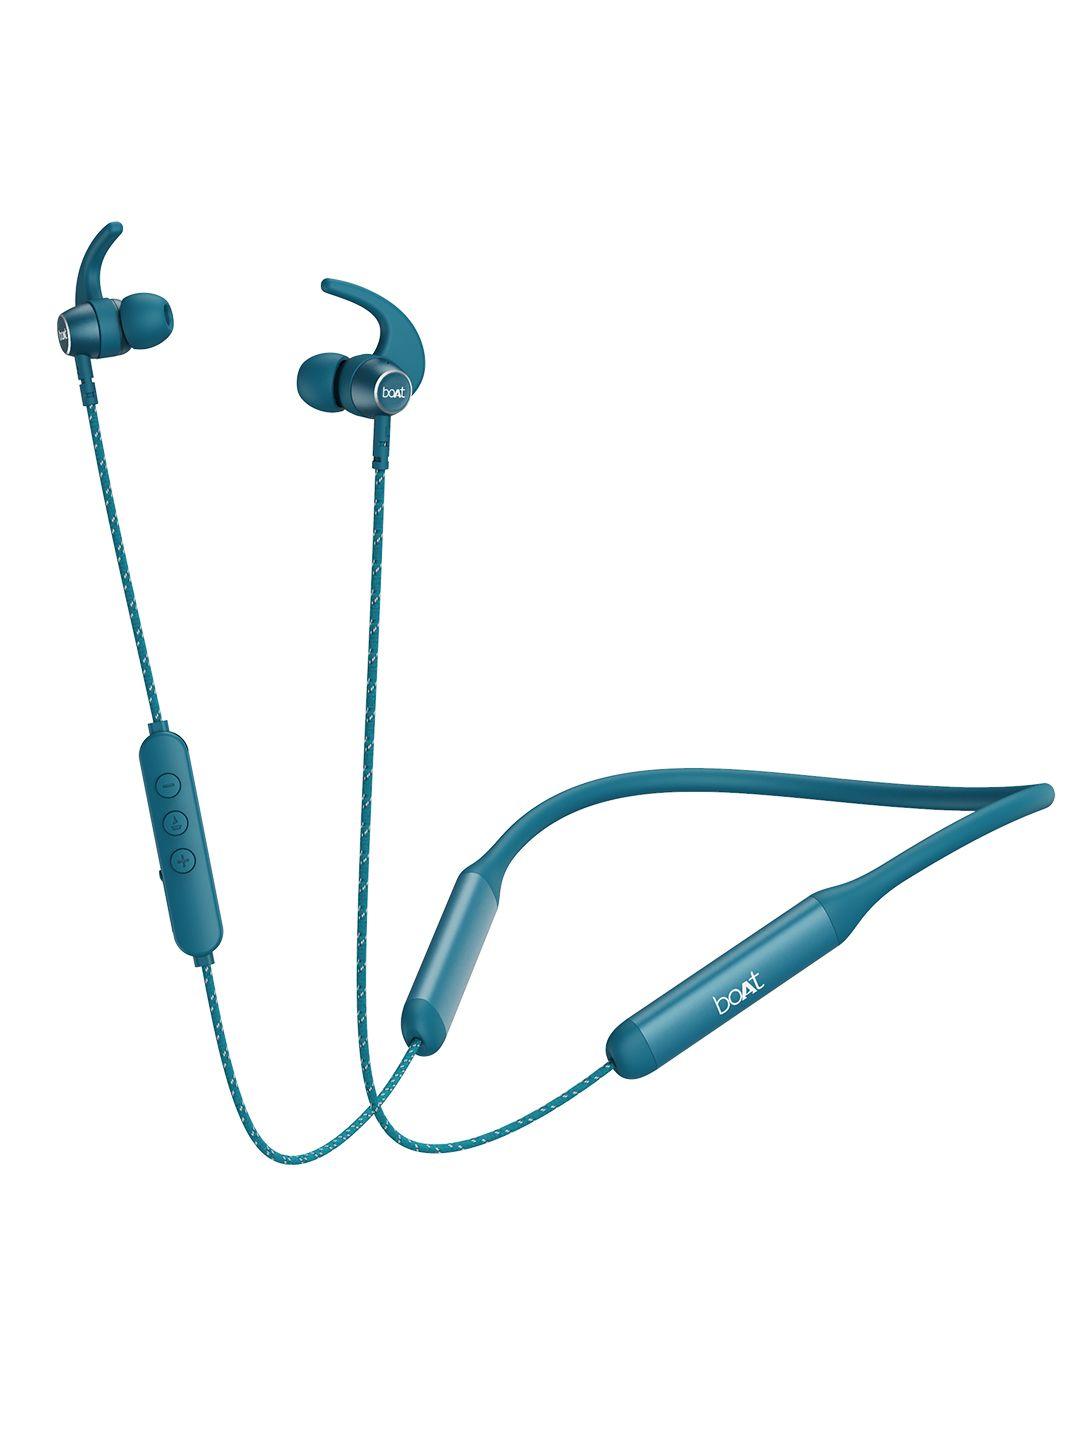 boat rockerz teal green 333 pro m with 60 hours battery bluetooth headset